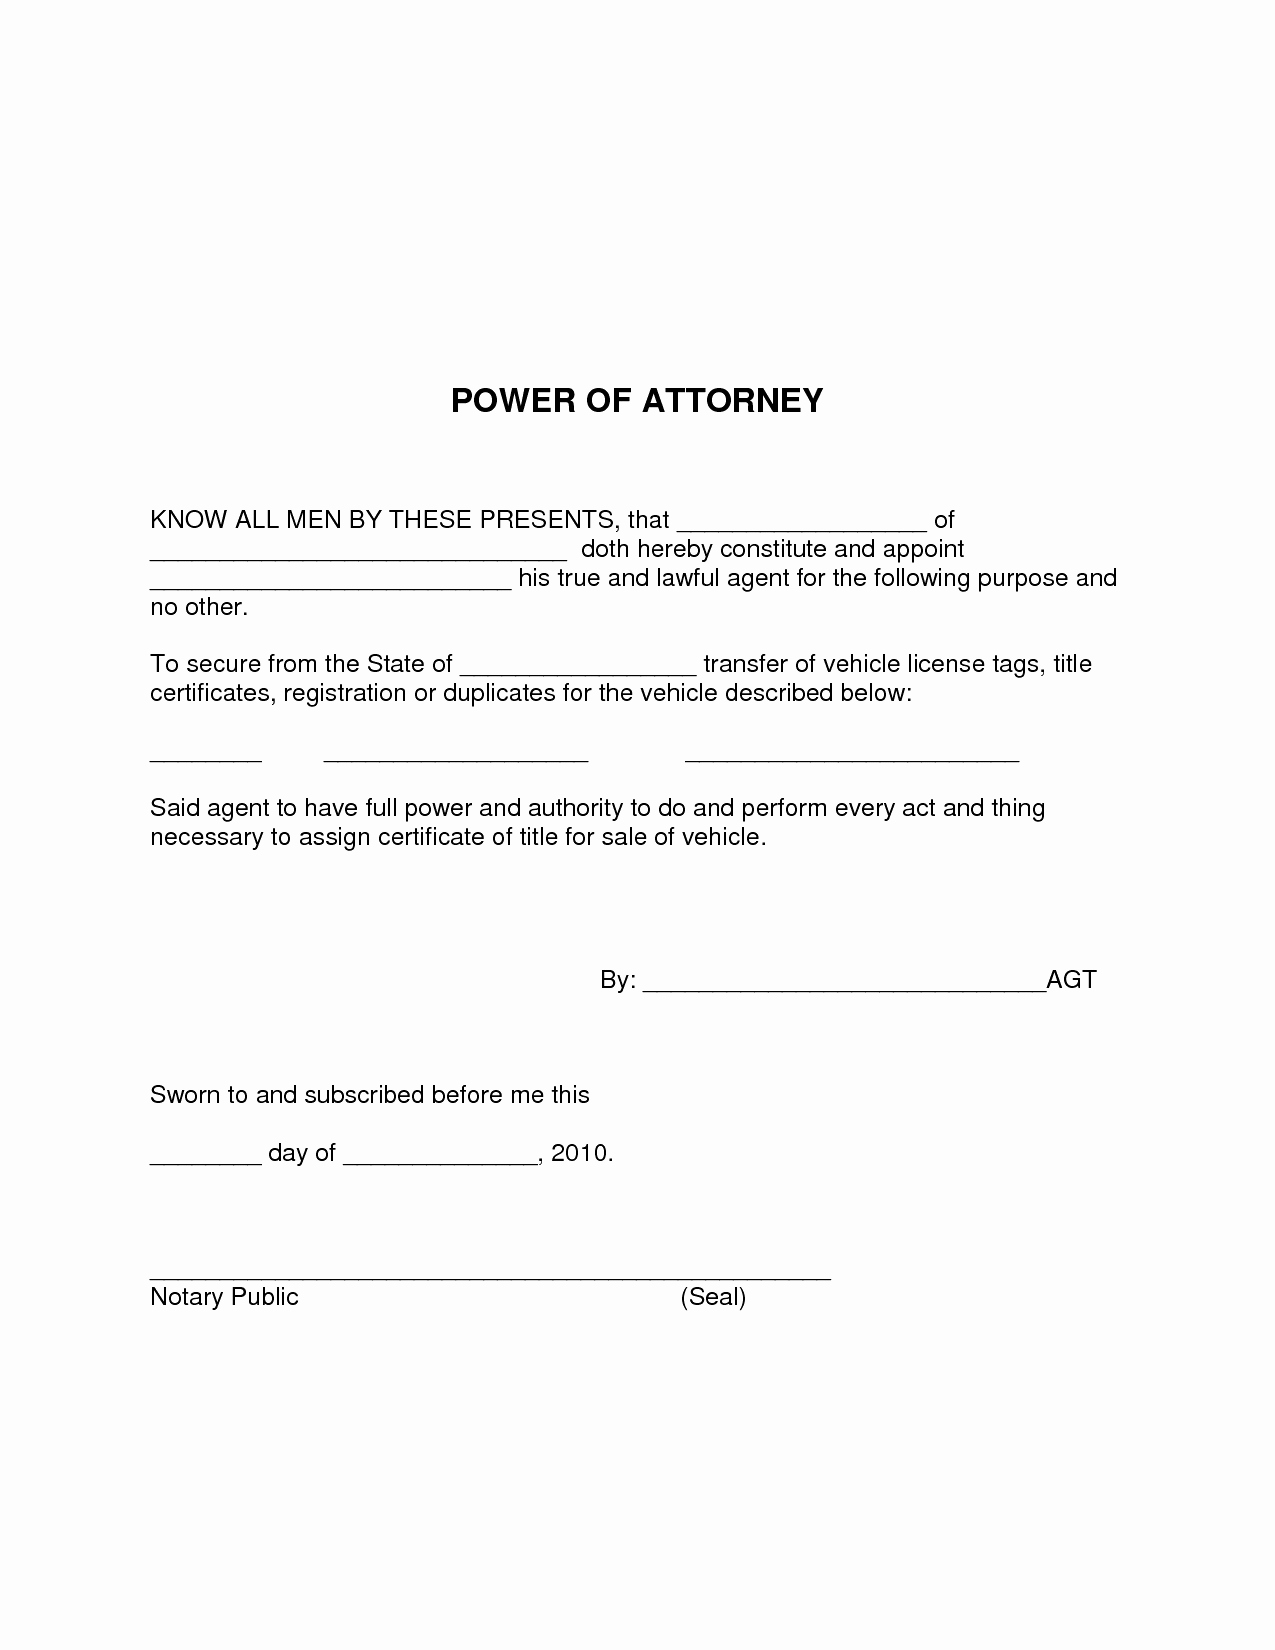 Mississippi Power Of attorney Beautiful Power attorney form Mississippi Luxury Mississippi Power attorney